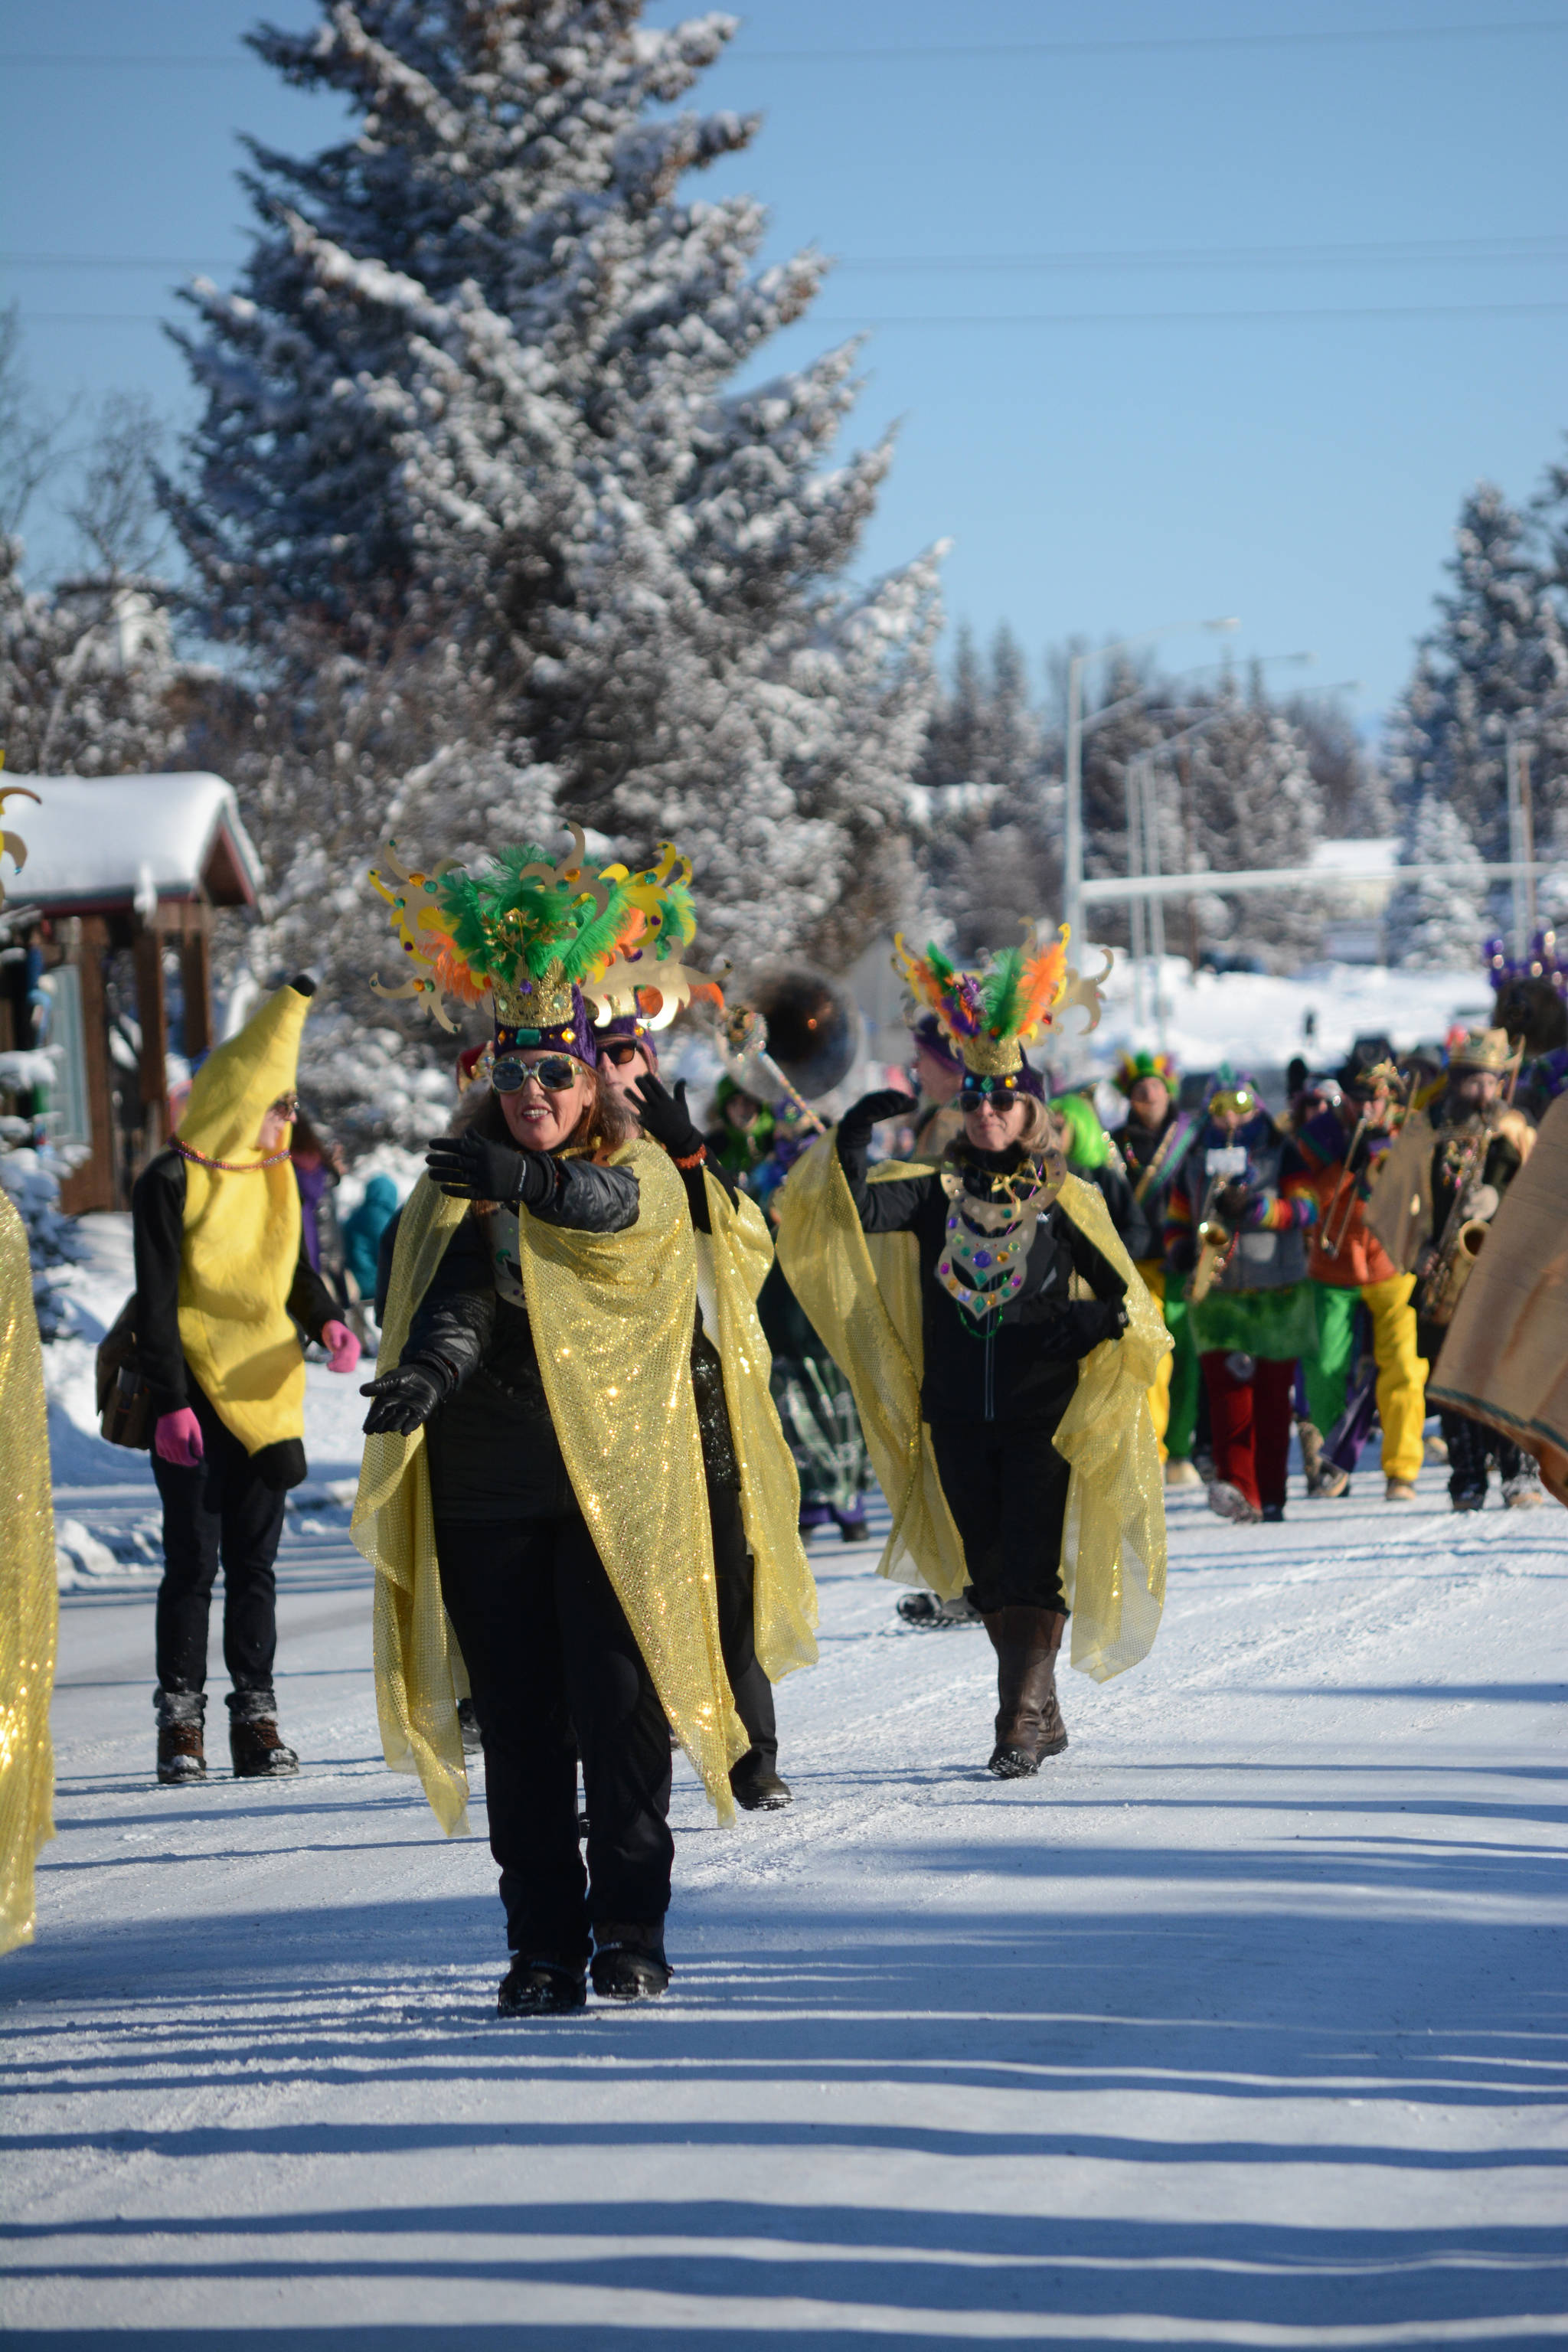 The Krewe of Gambrinus marches in the Homer Winter Carnival parade on Saturday. They won Best of Show in the parade contest. (Photo by Michael Armstrong, Homer News)